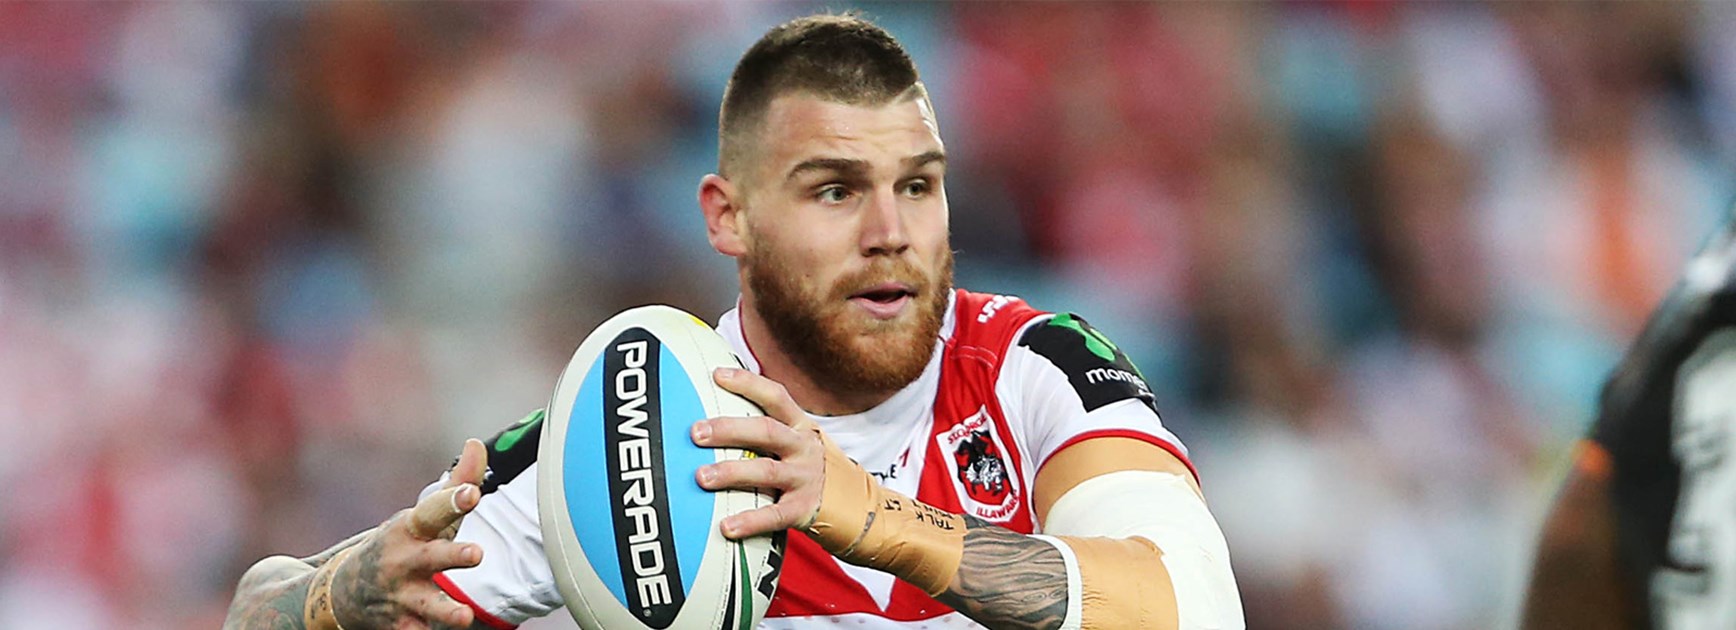 Josh Dugan scored the Dragons' first points on Saturday with a superb solo try.